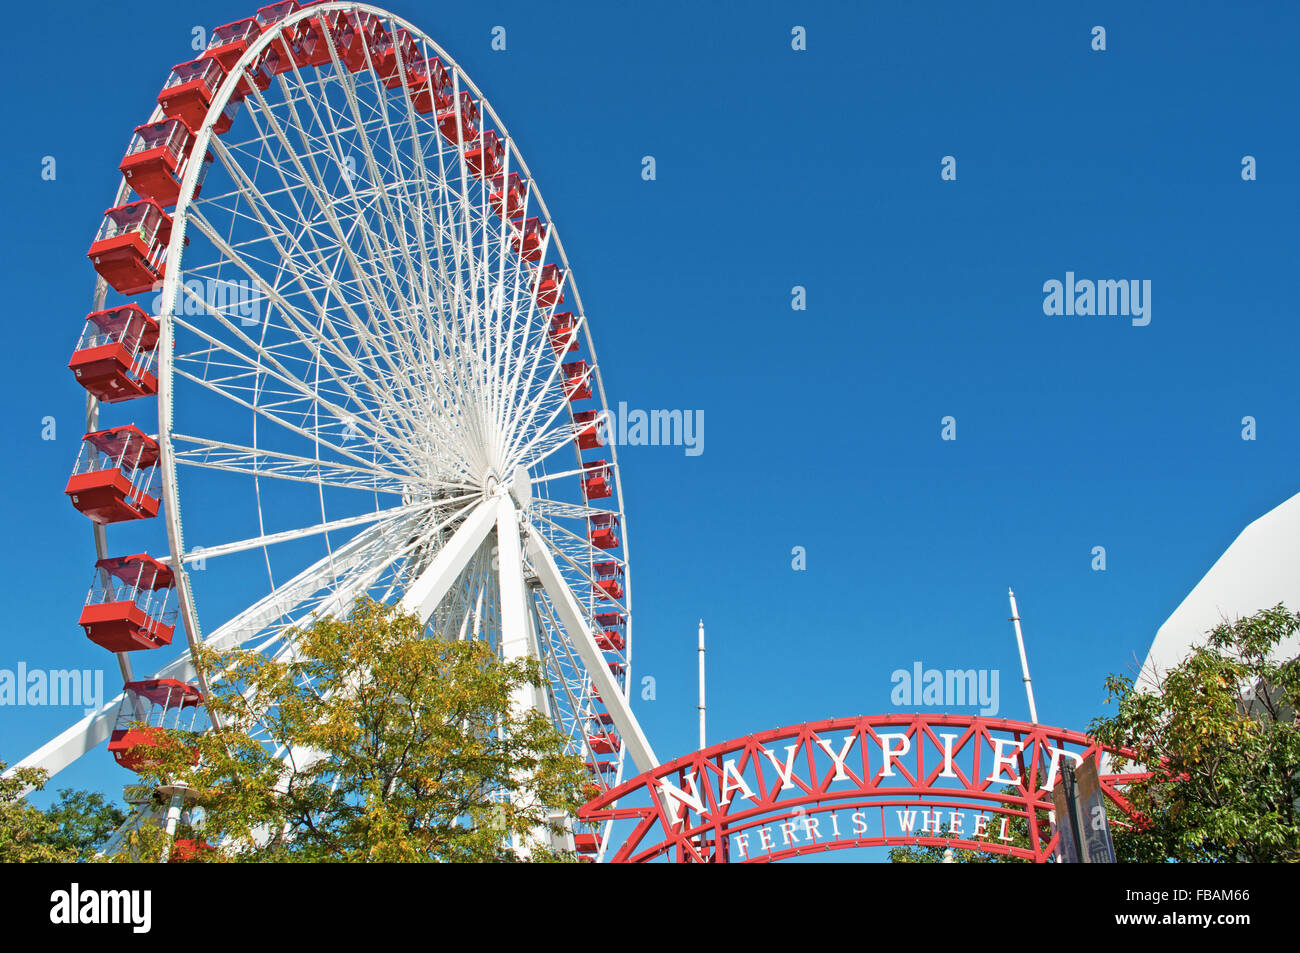 Chicago, Navy Pier: view of the Chicago Ferris Wheel, from the original wheel at the World's Columbian Exposition of 1893 to 2016's Centennial Wheel Stock Photo